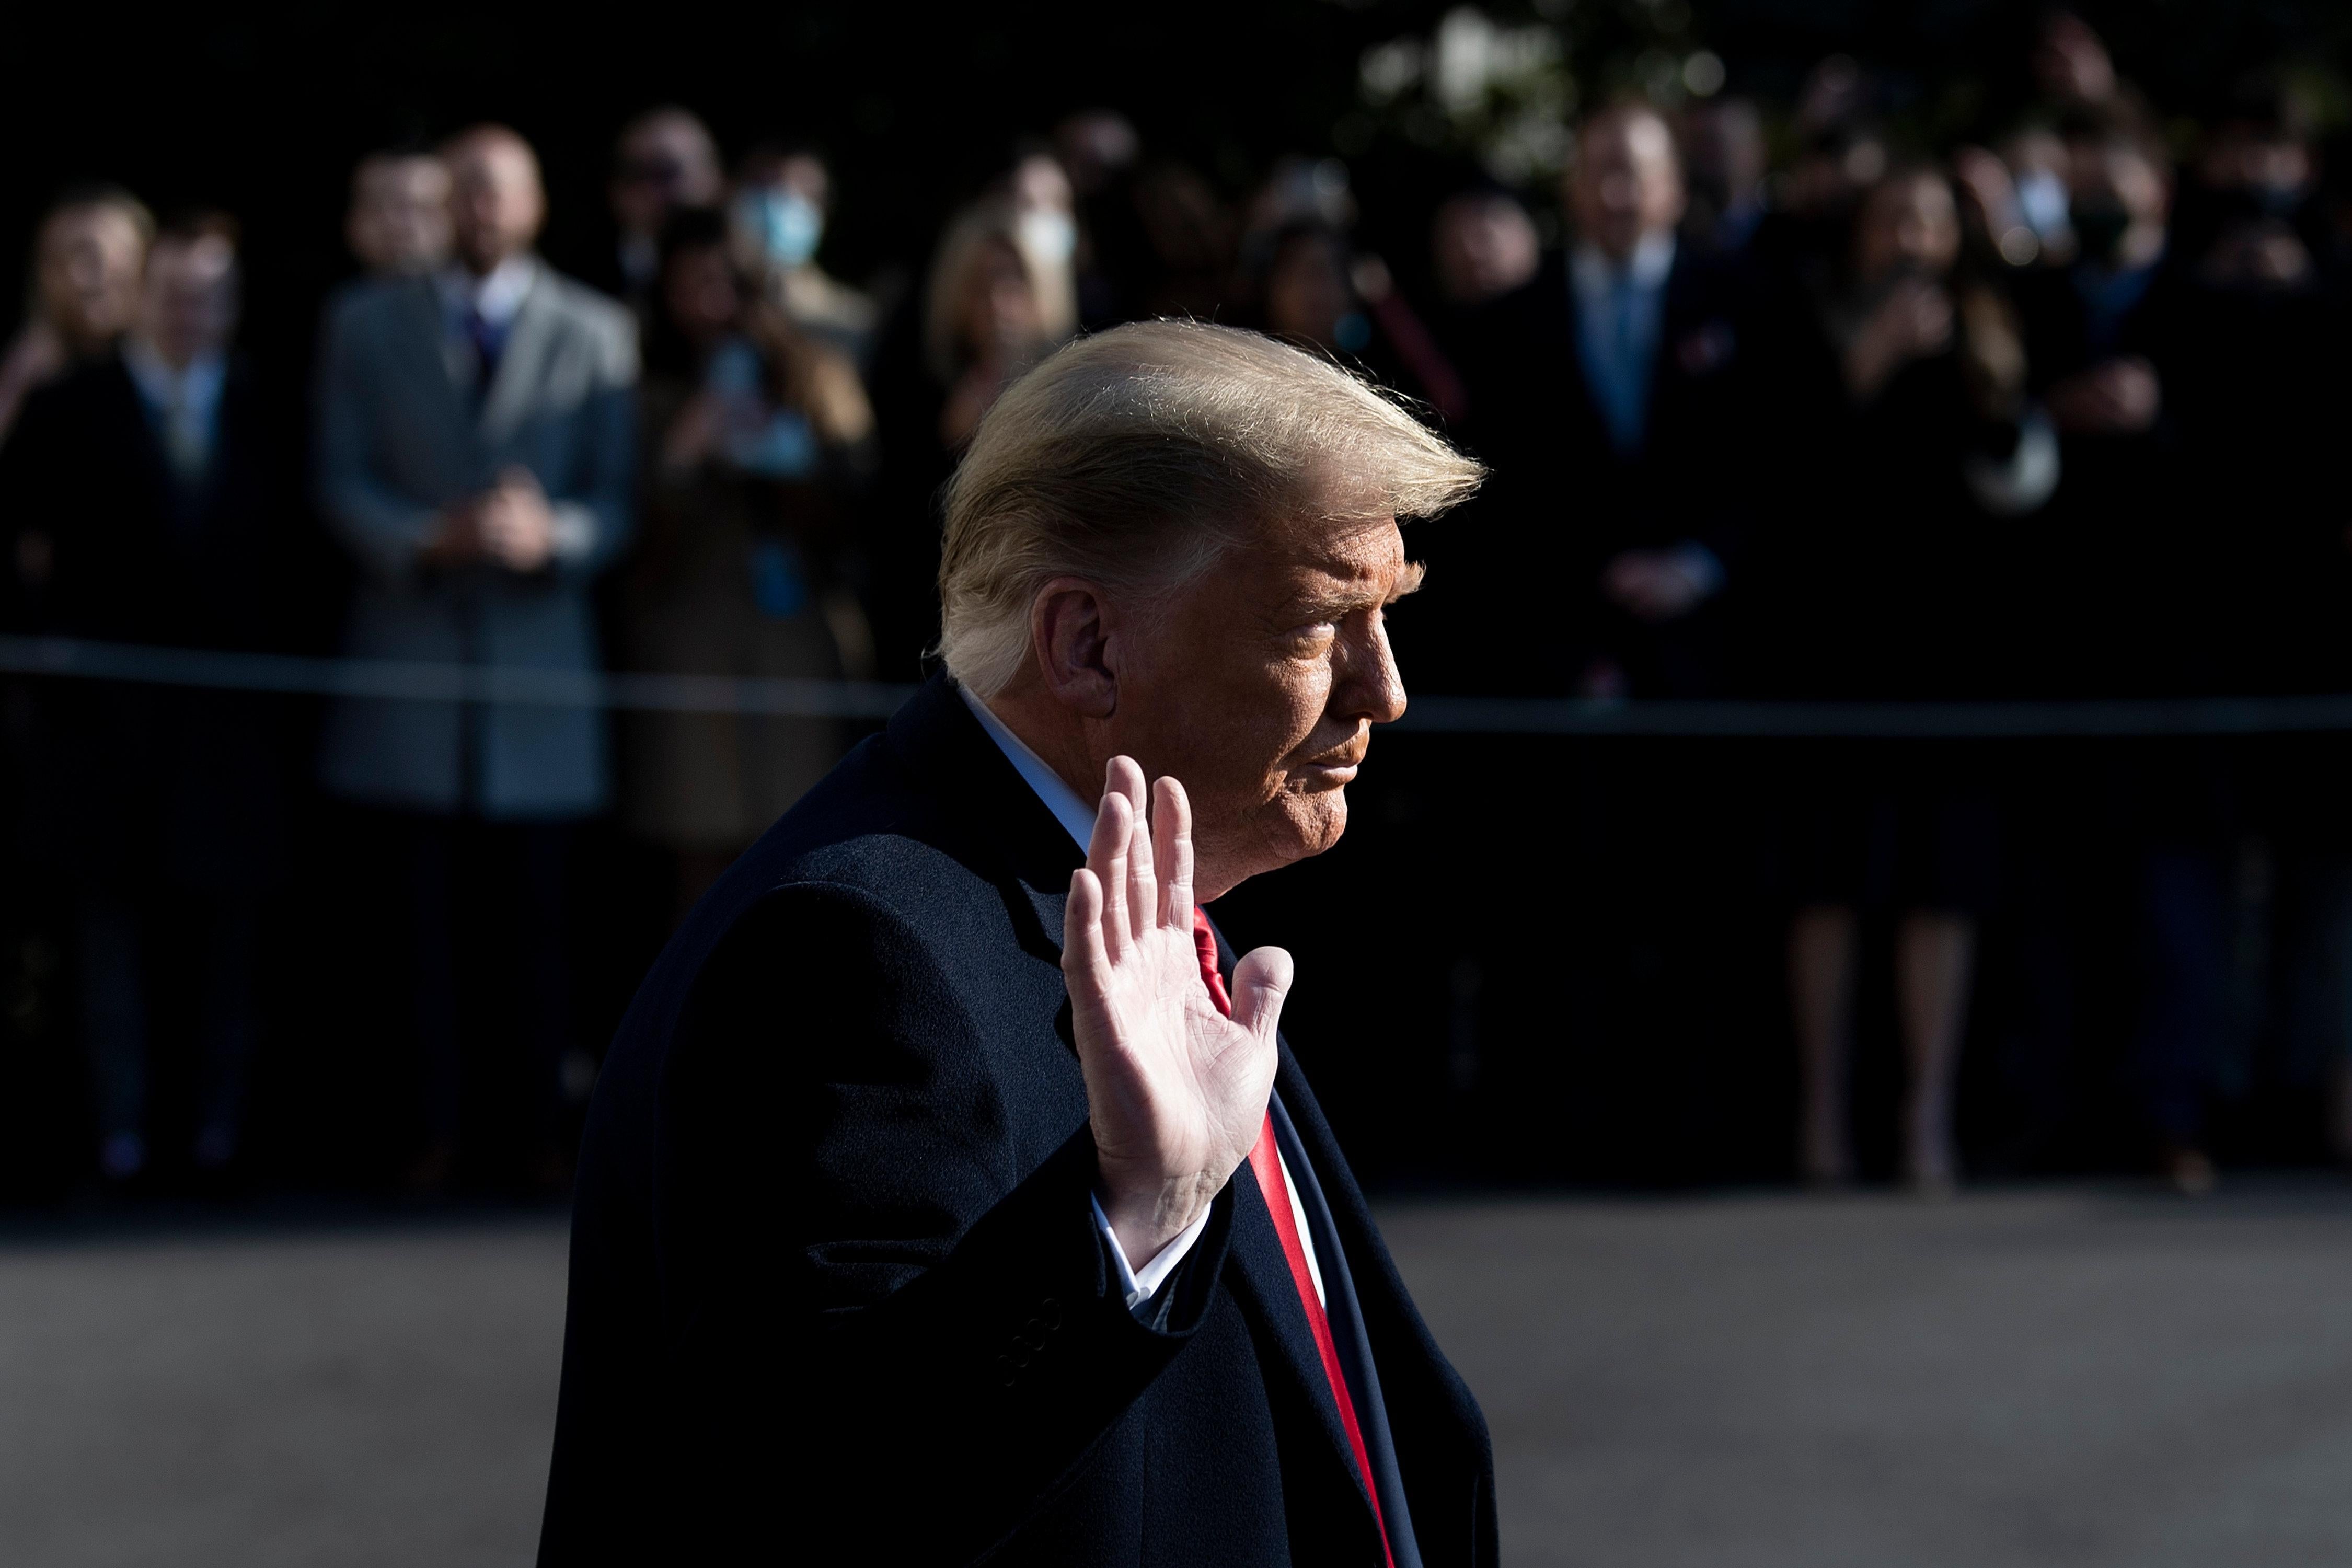 President Donald Trump walks to Marine One on the South Lawn of the White House on January 12, 2021 in Washington, D.C.